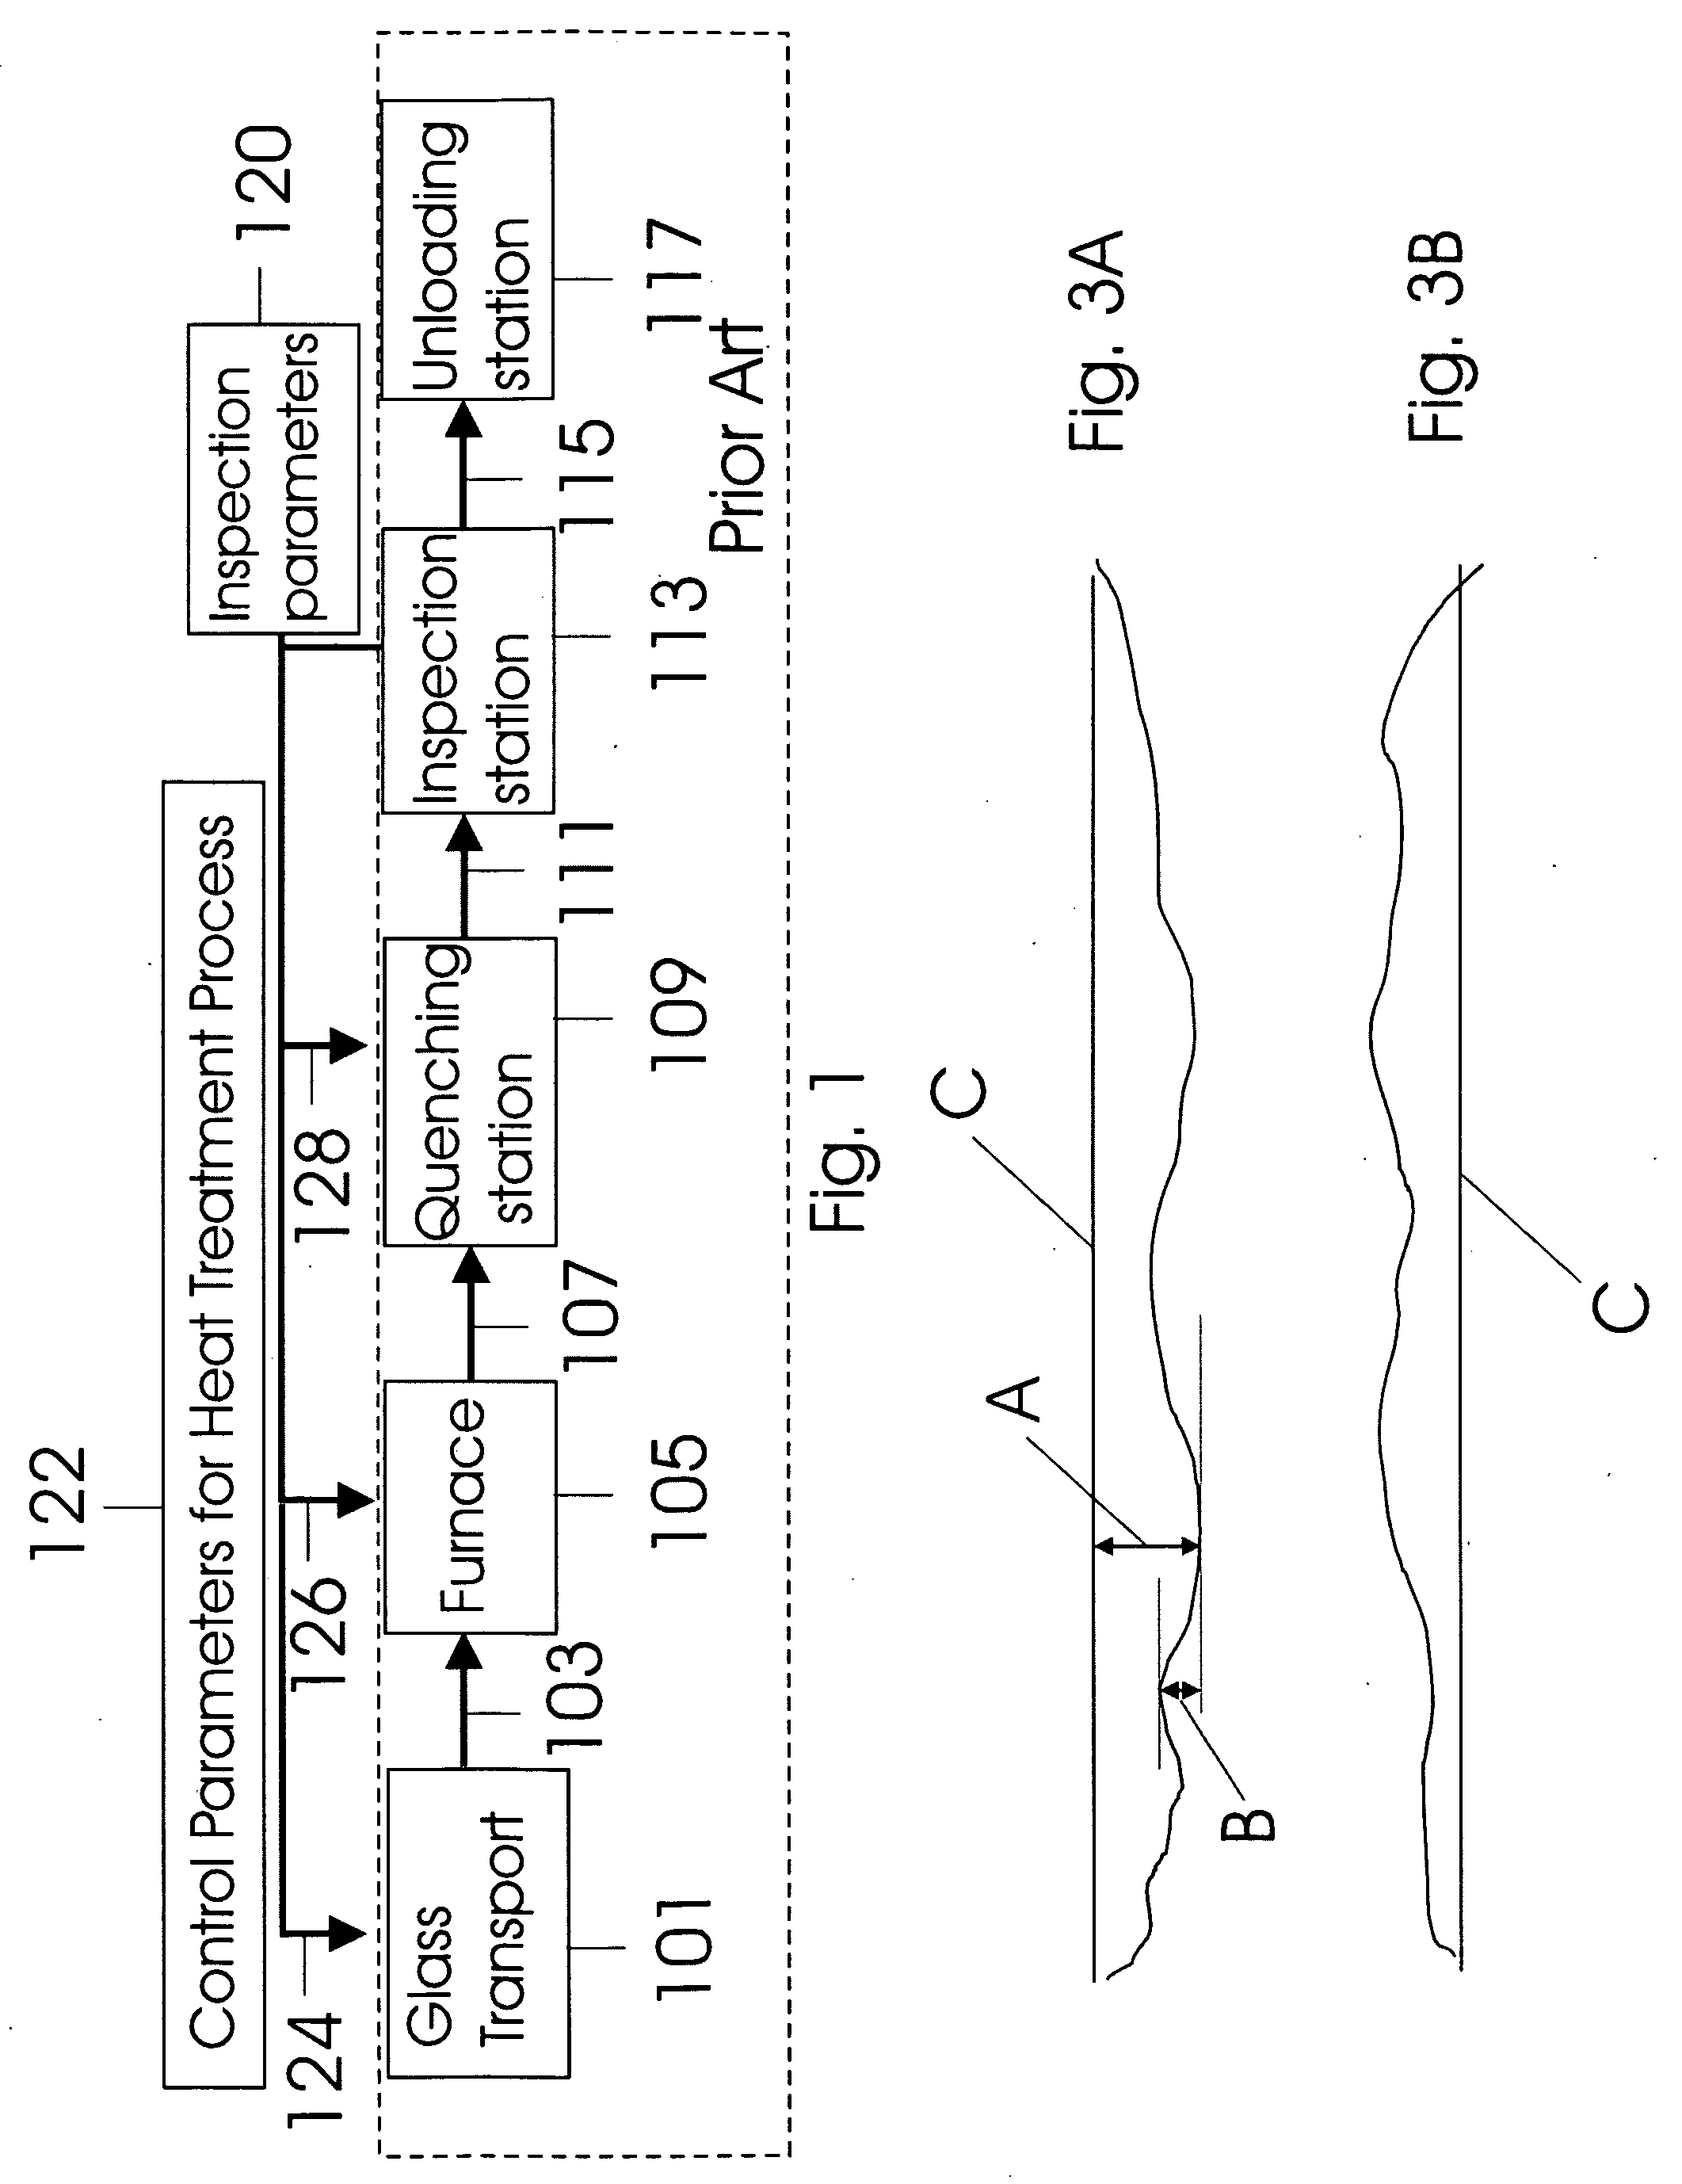 Closed loop control system for the heat-treatment of glass